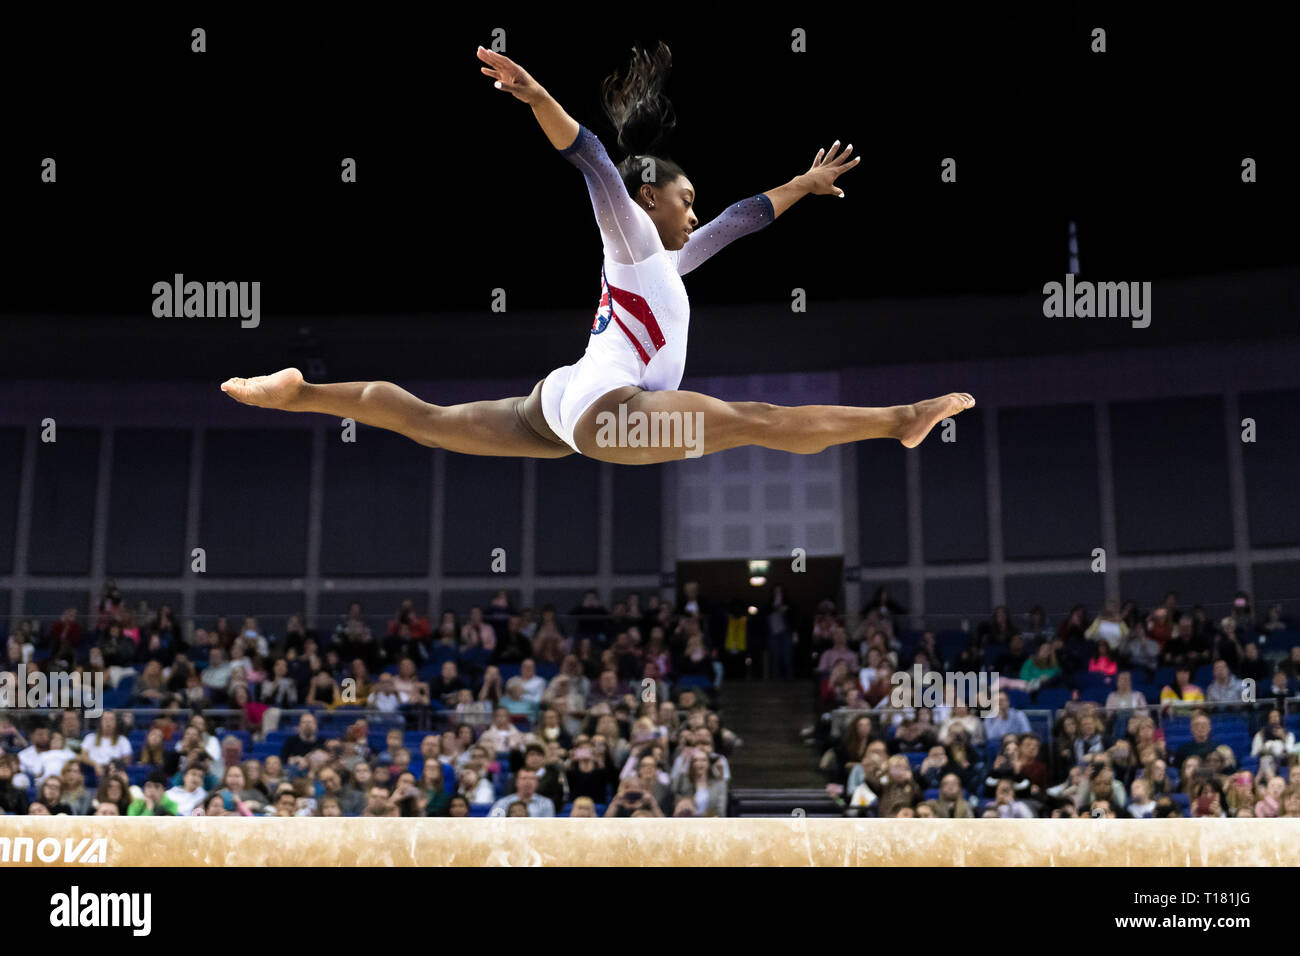 London, UK. 23rd Mar, 2019. Simon Biles performs on the beam during the Matchroom Multisport presents the 2019 Superstars of Gymnastics at The O2 Arena on Saturday, 23 March 2019. LONDON ENGLAND. Credit: Taka Wu/Alamy Live News Stock Photo